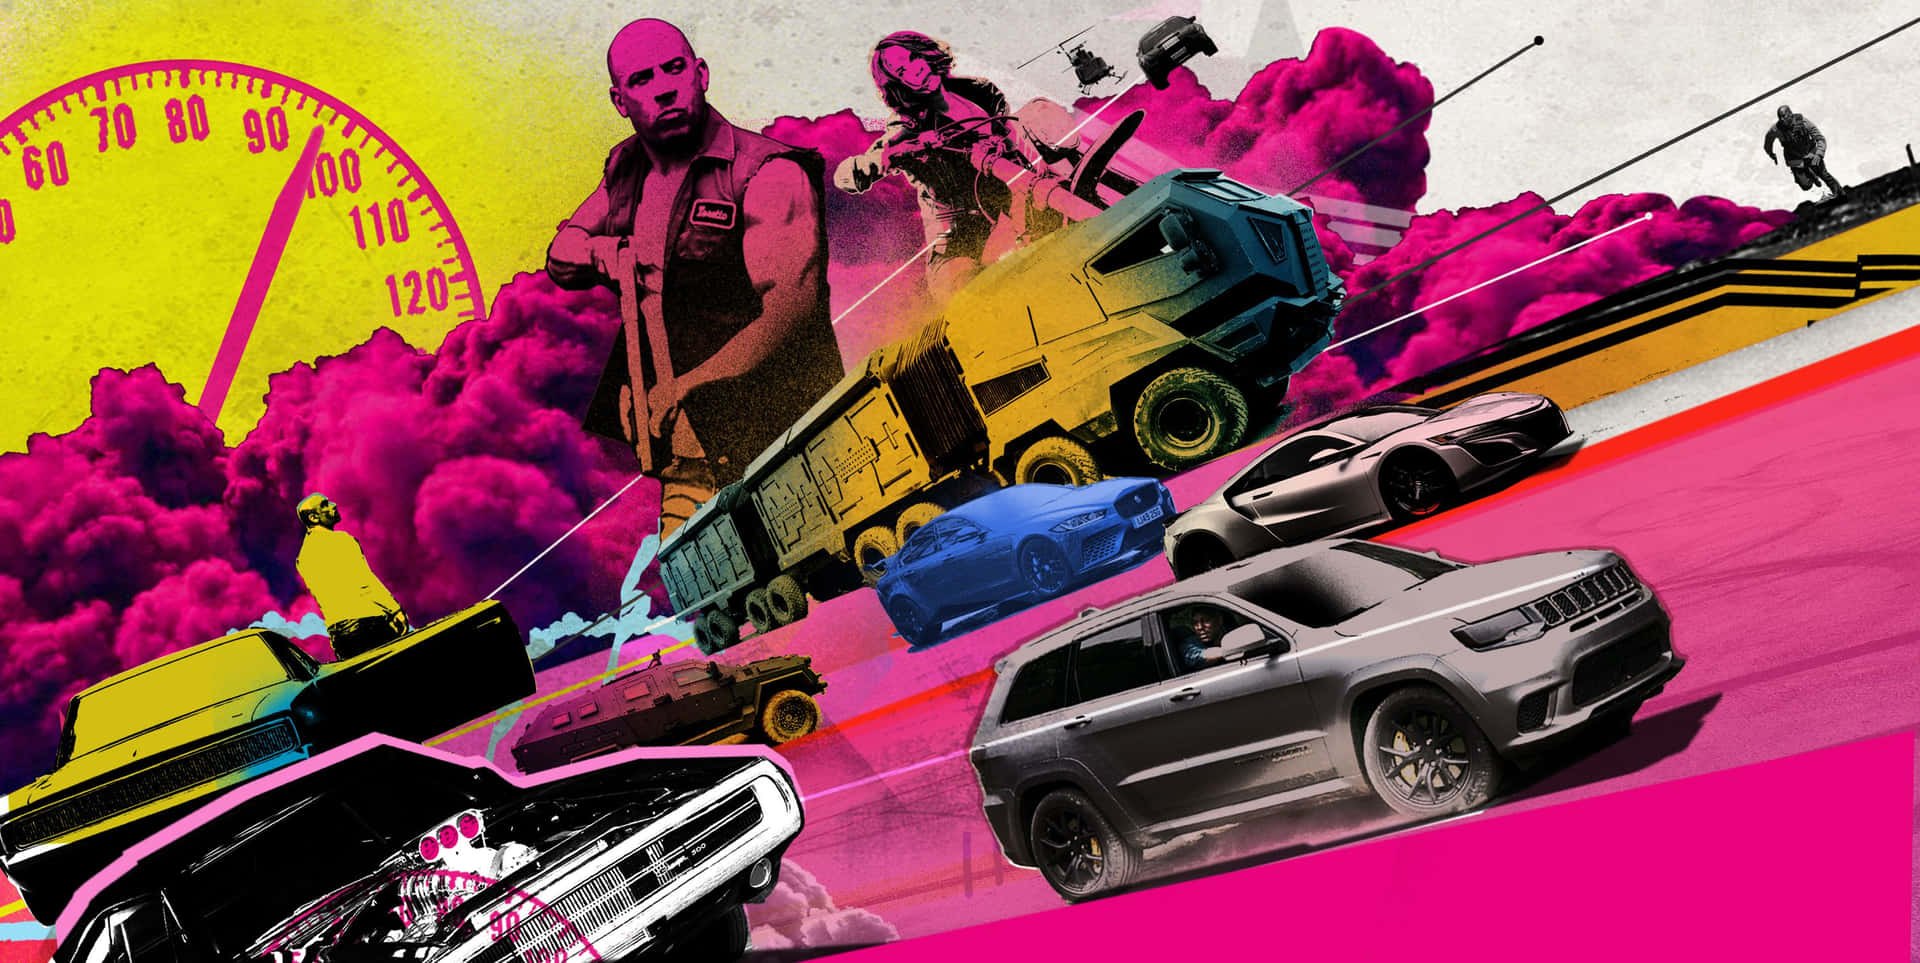 The latest installment of the Fast and Furious franchise is almost here! Wallpaper